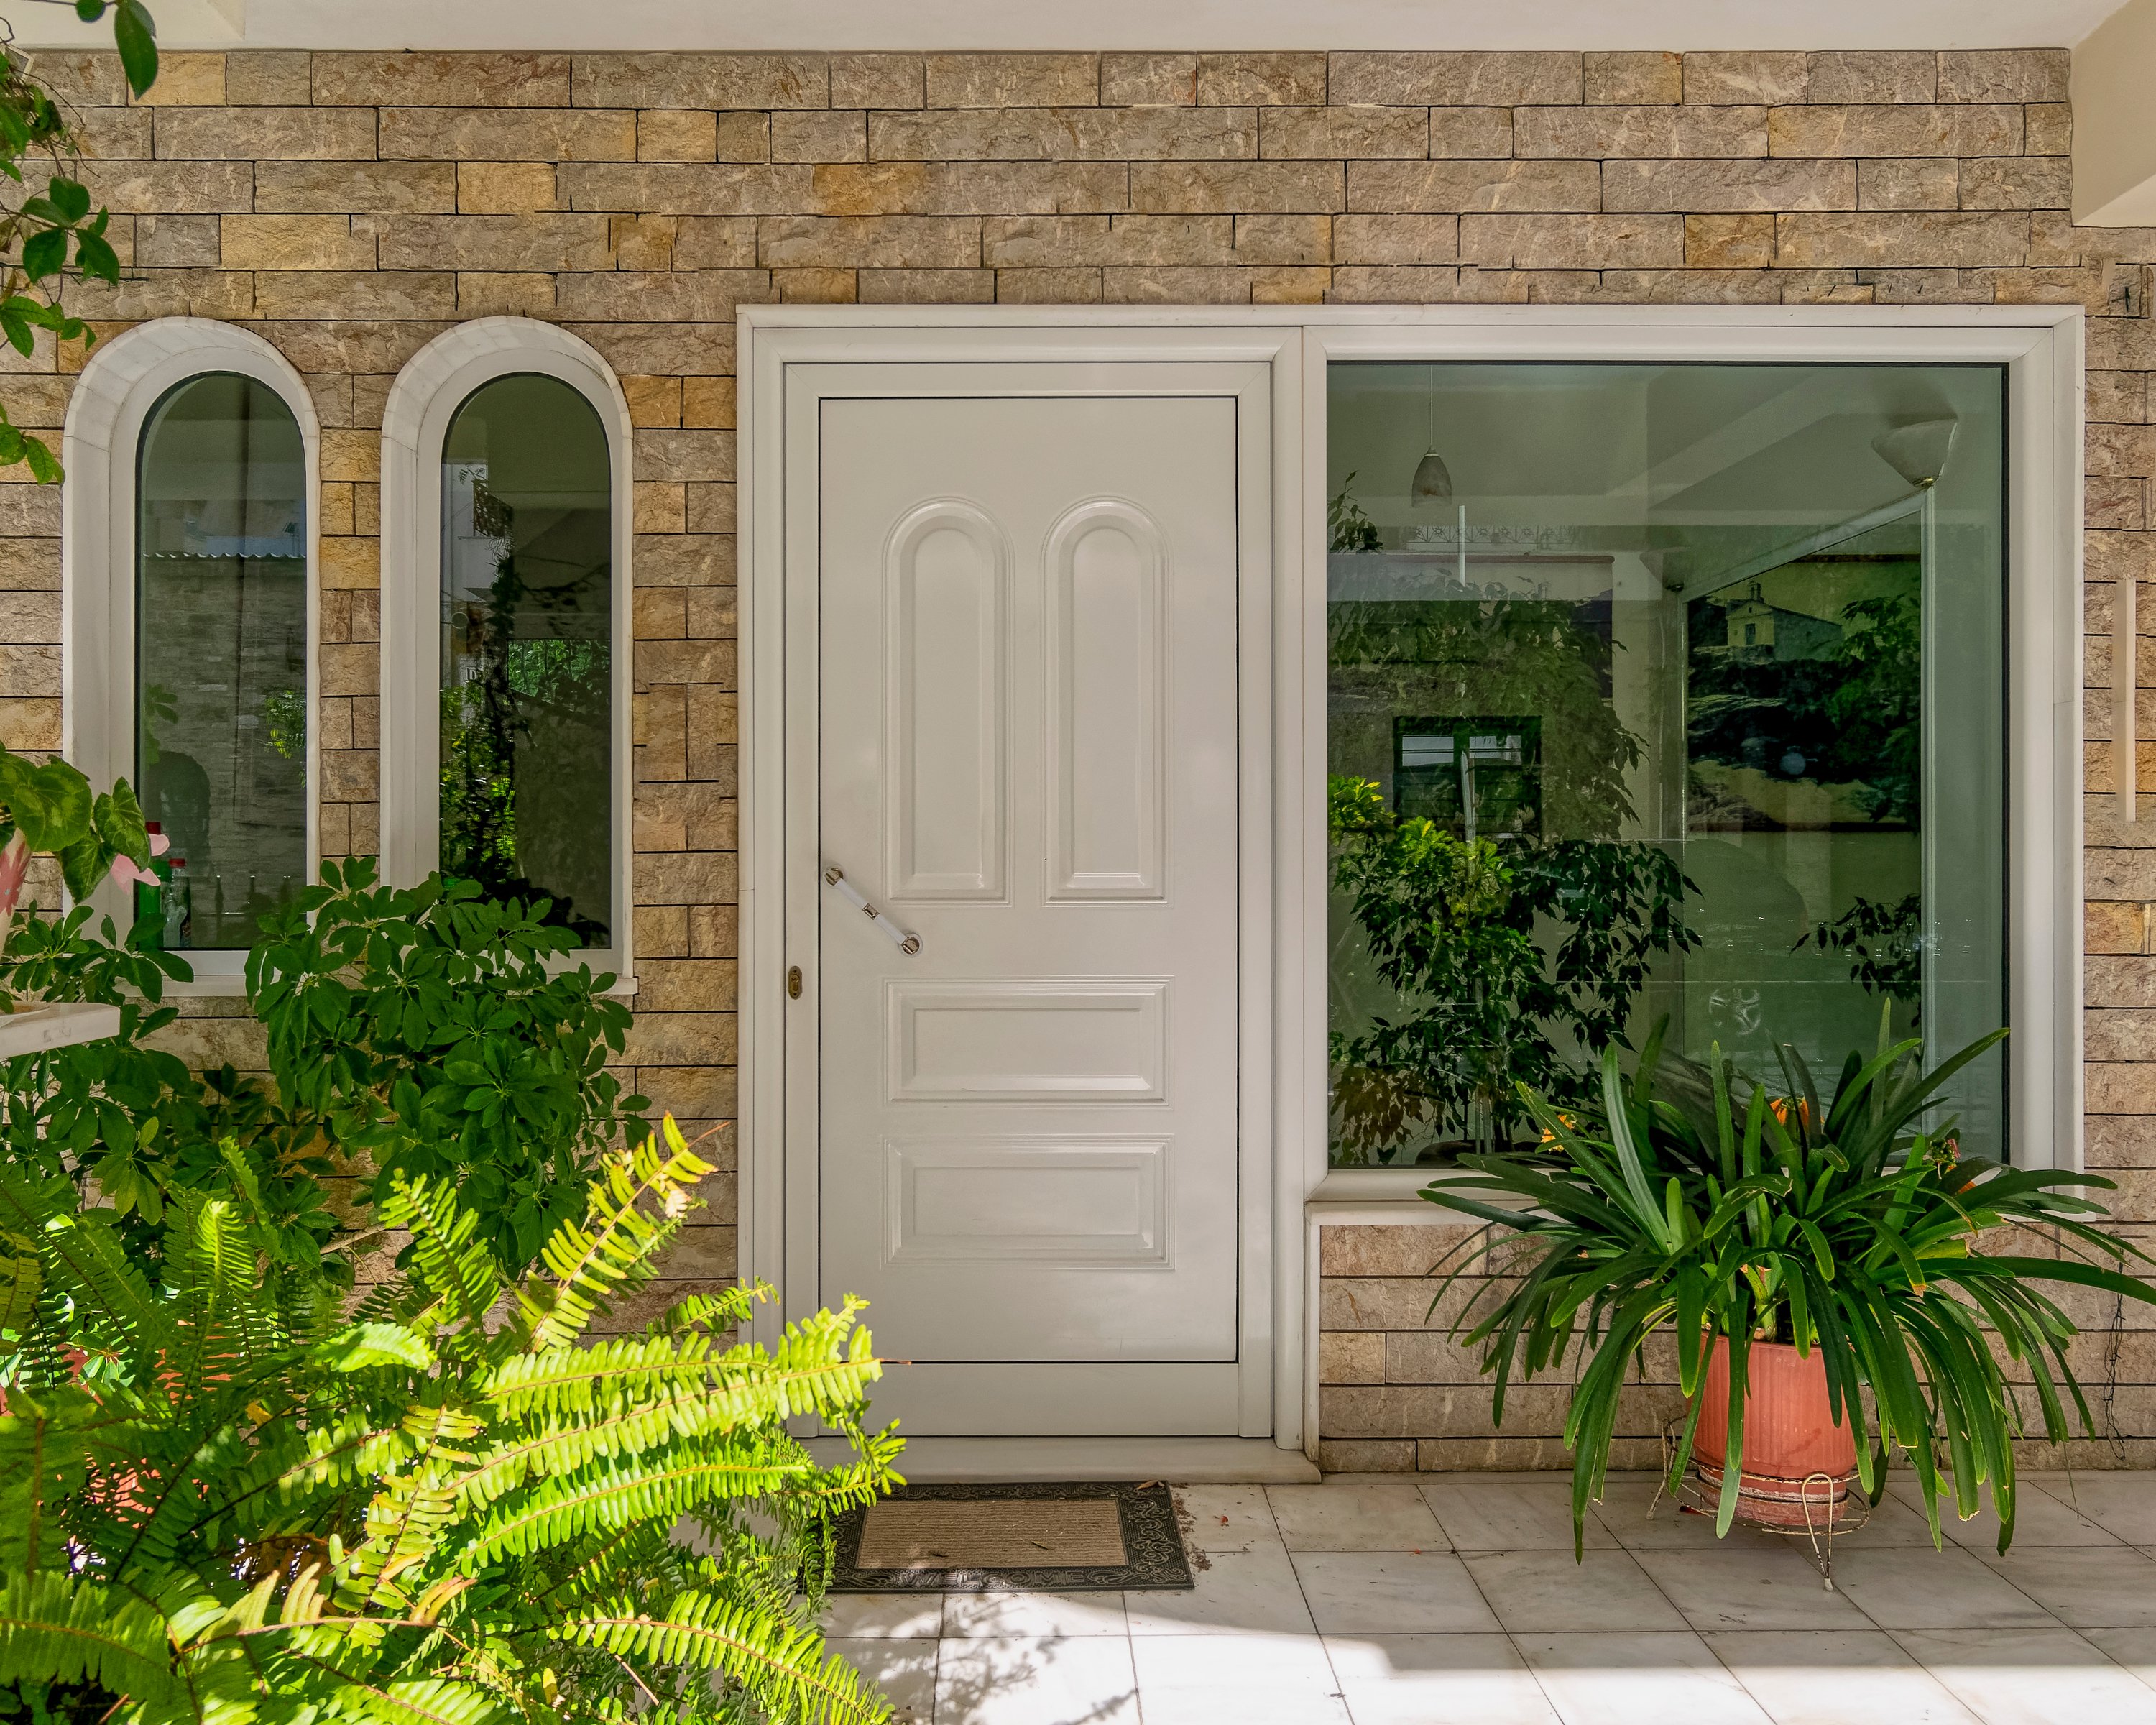 Why do the entry doors to most homes open inward, while in most